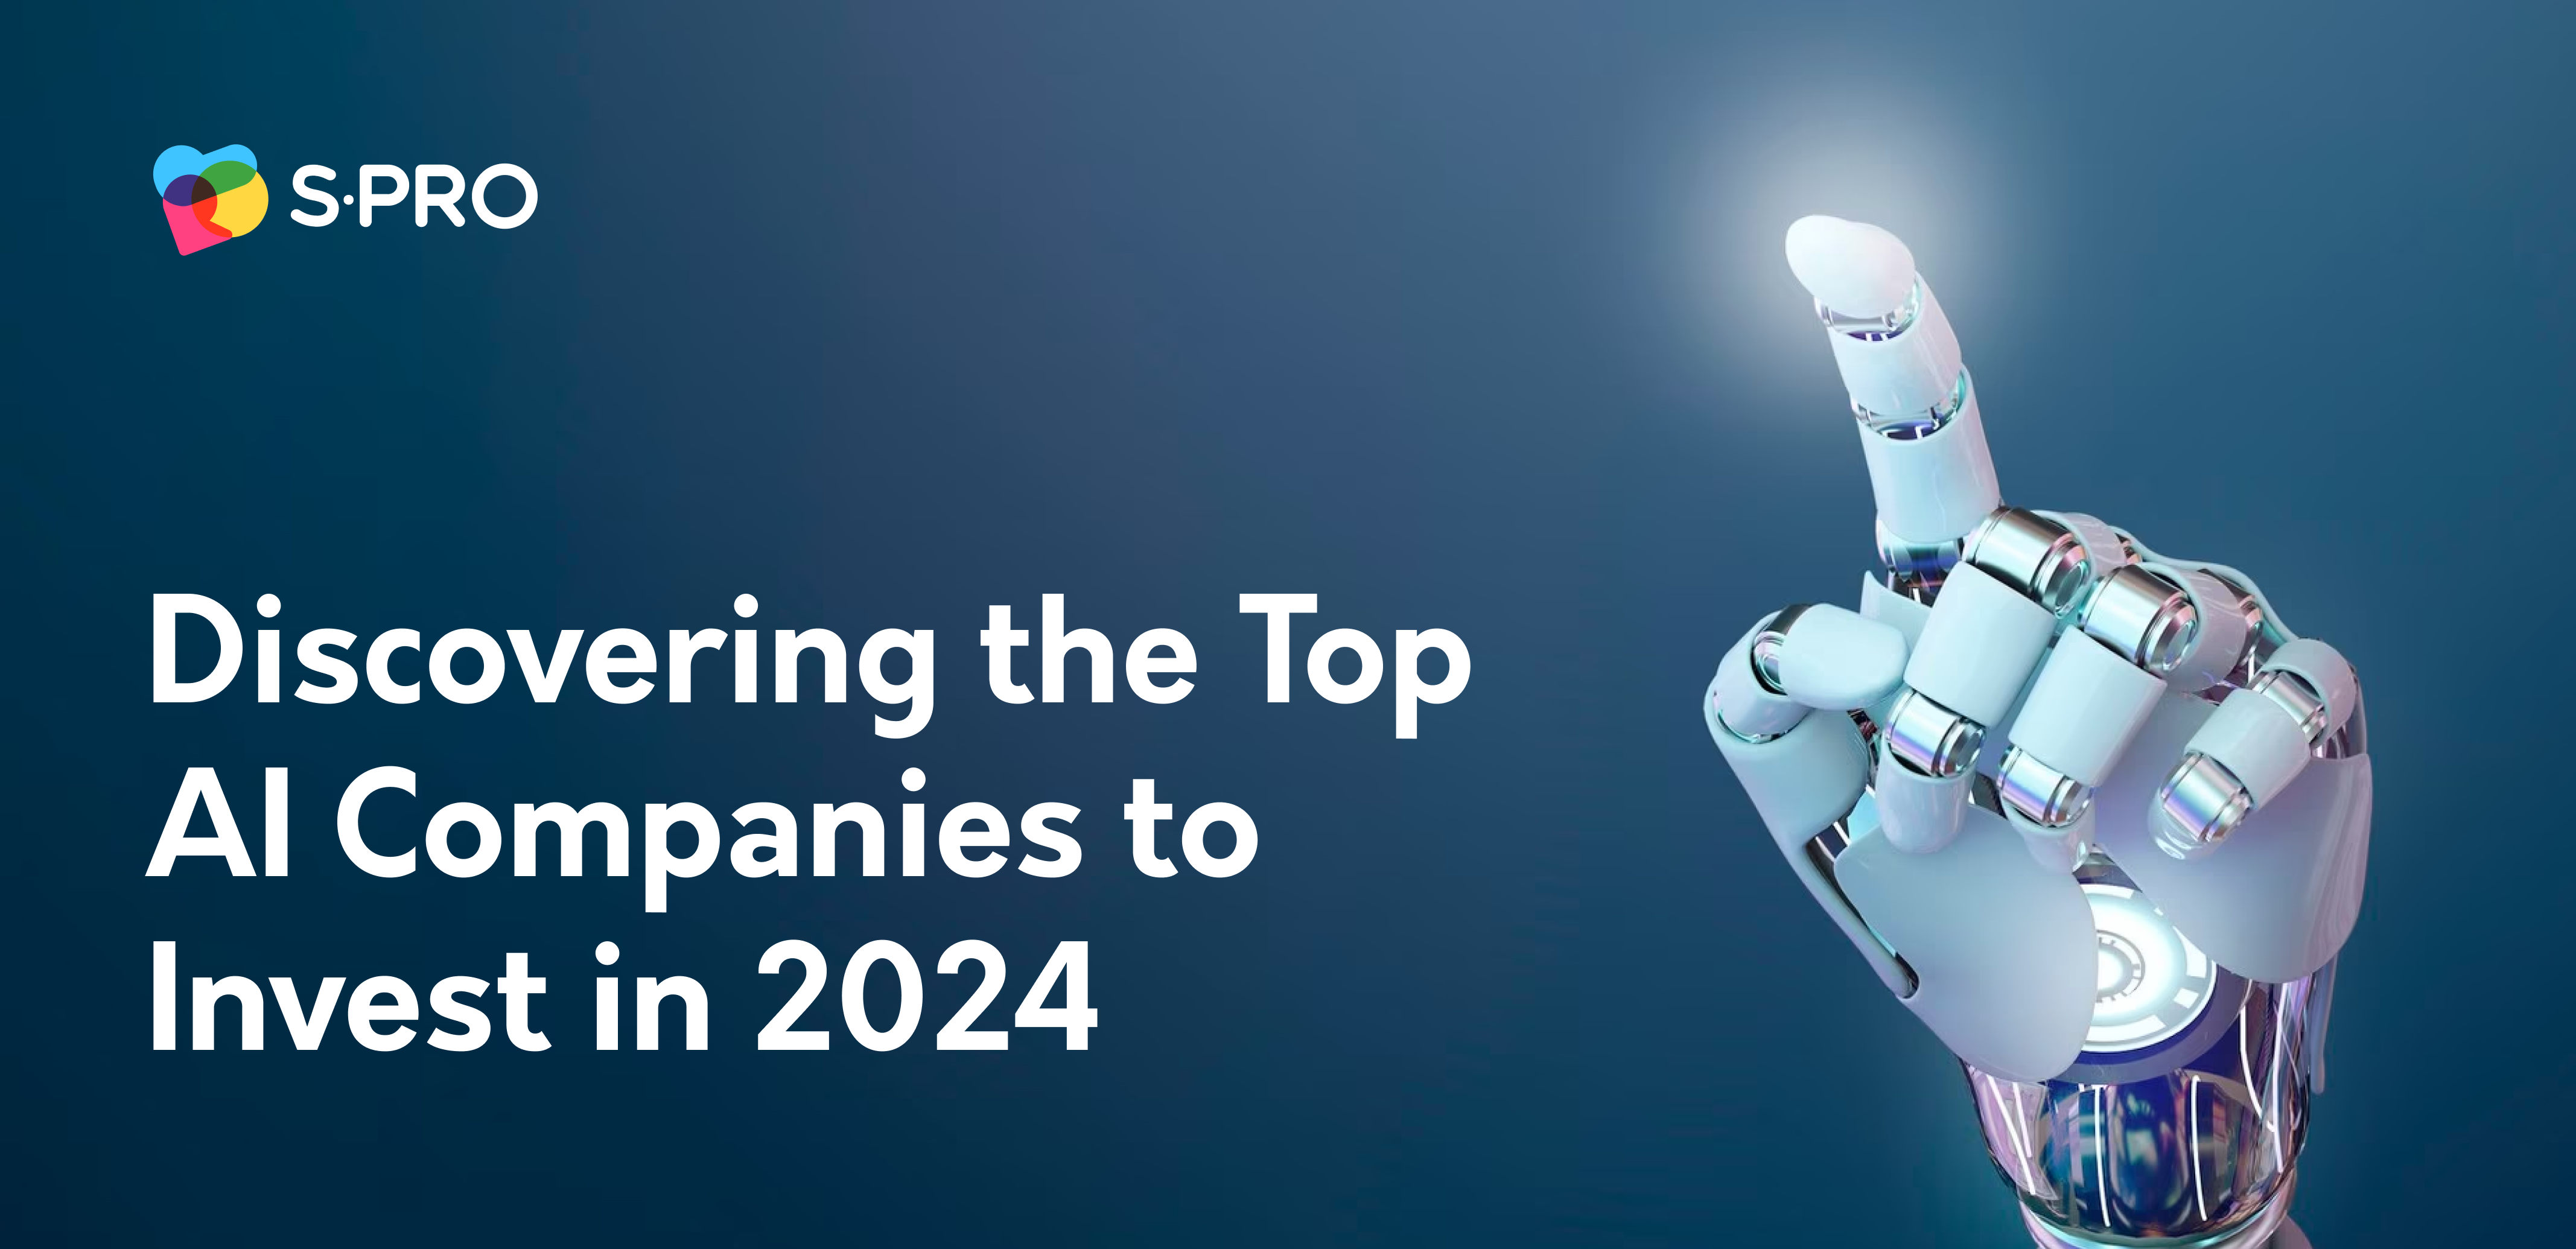 Discovering the Top AI Companies to Invest in 2024